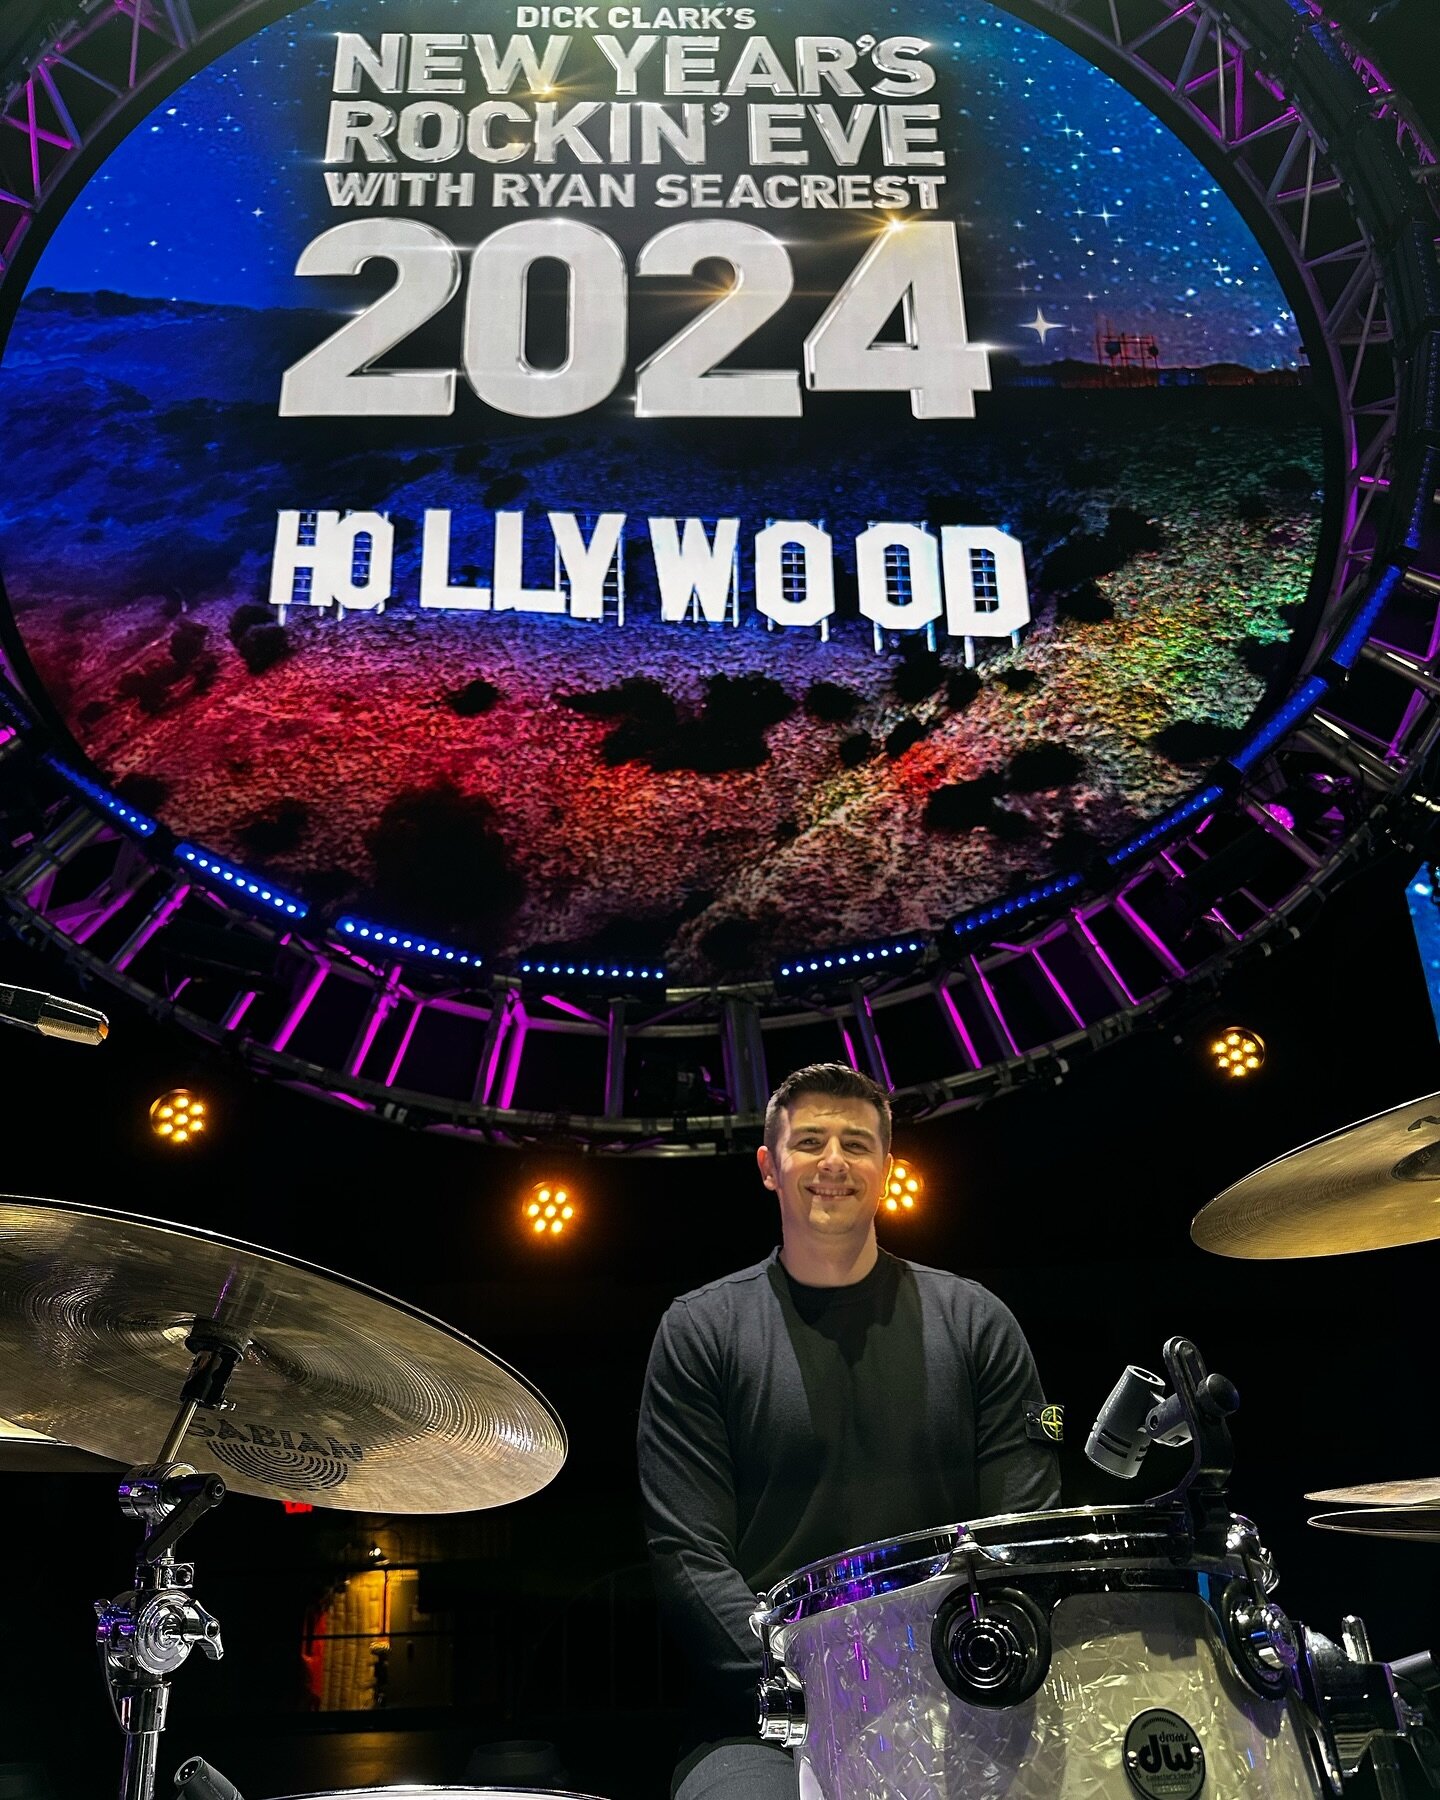 Happy New Year from behind the Drums! 
Just appeared on @rockineve with @paulrussell! 
I&rsquo;m very grateful for my friends, collaborators and everyone who inspired me this year! I wish everyone love, peace and happiness in this new year! 
Many hug